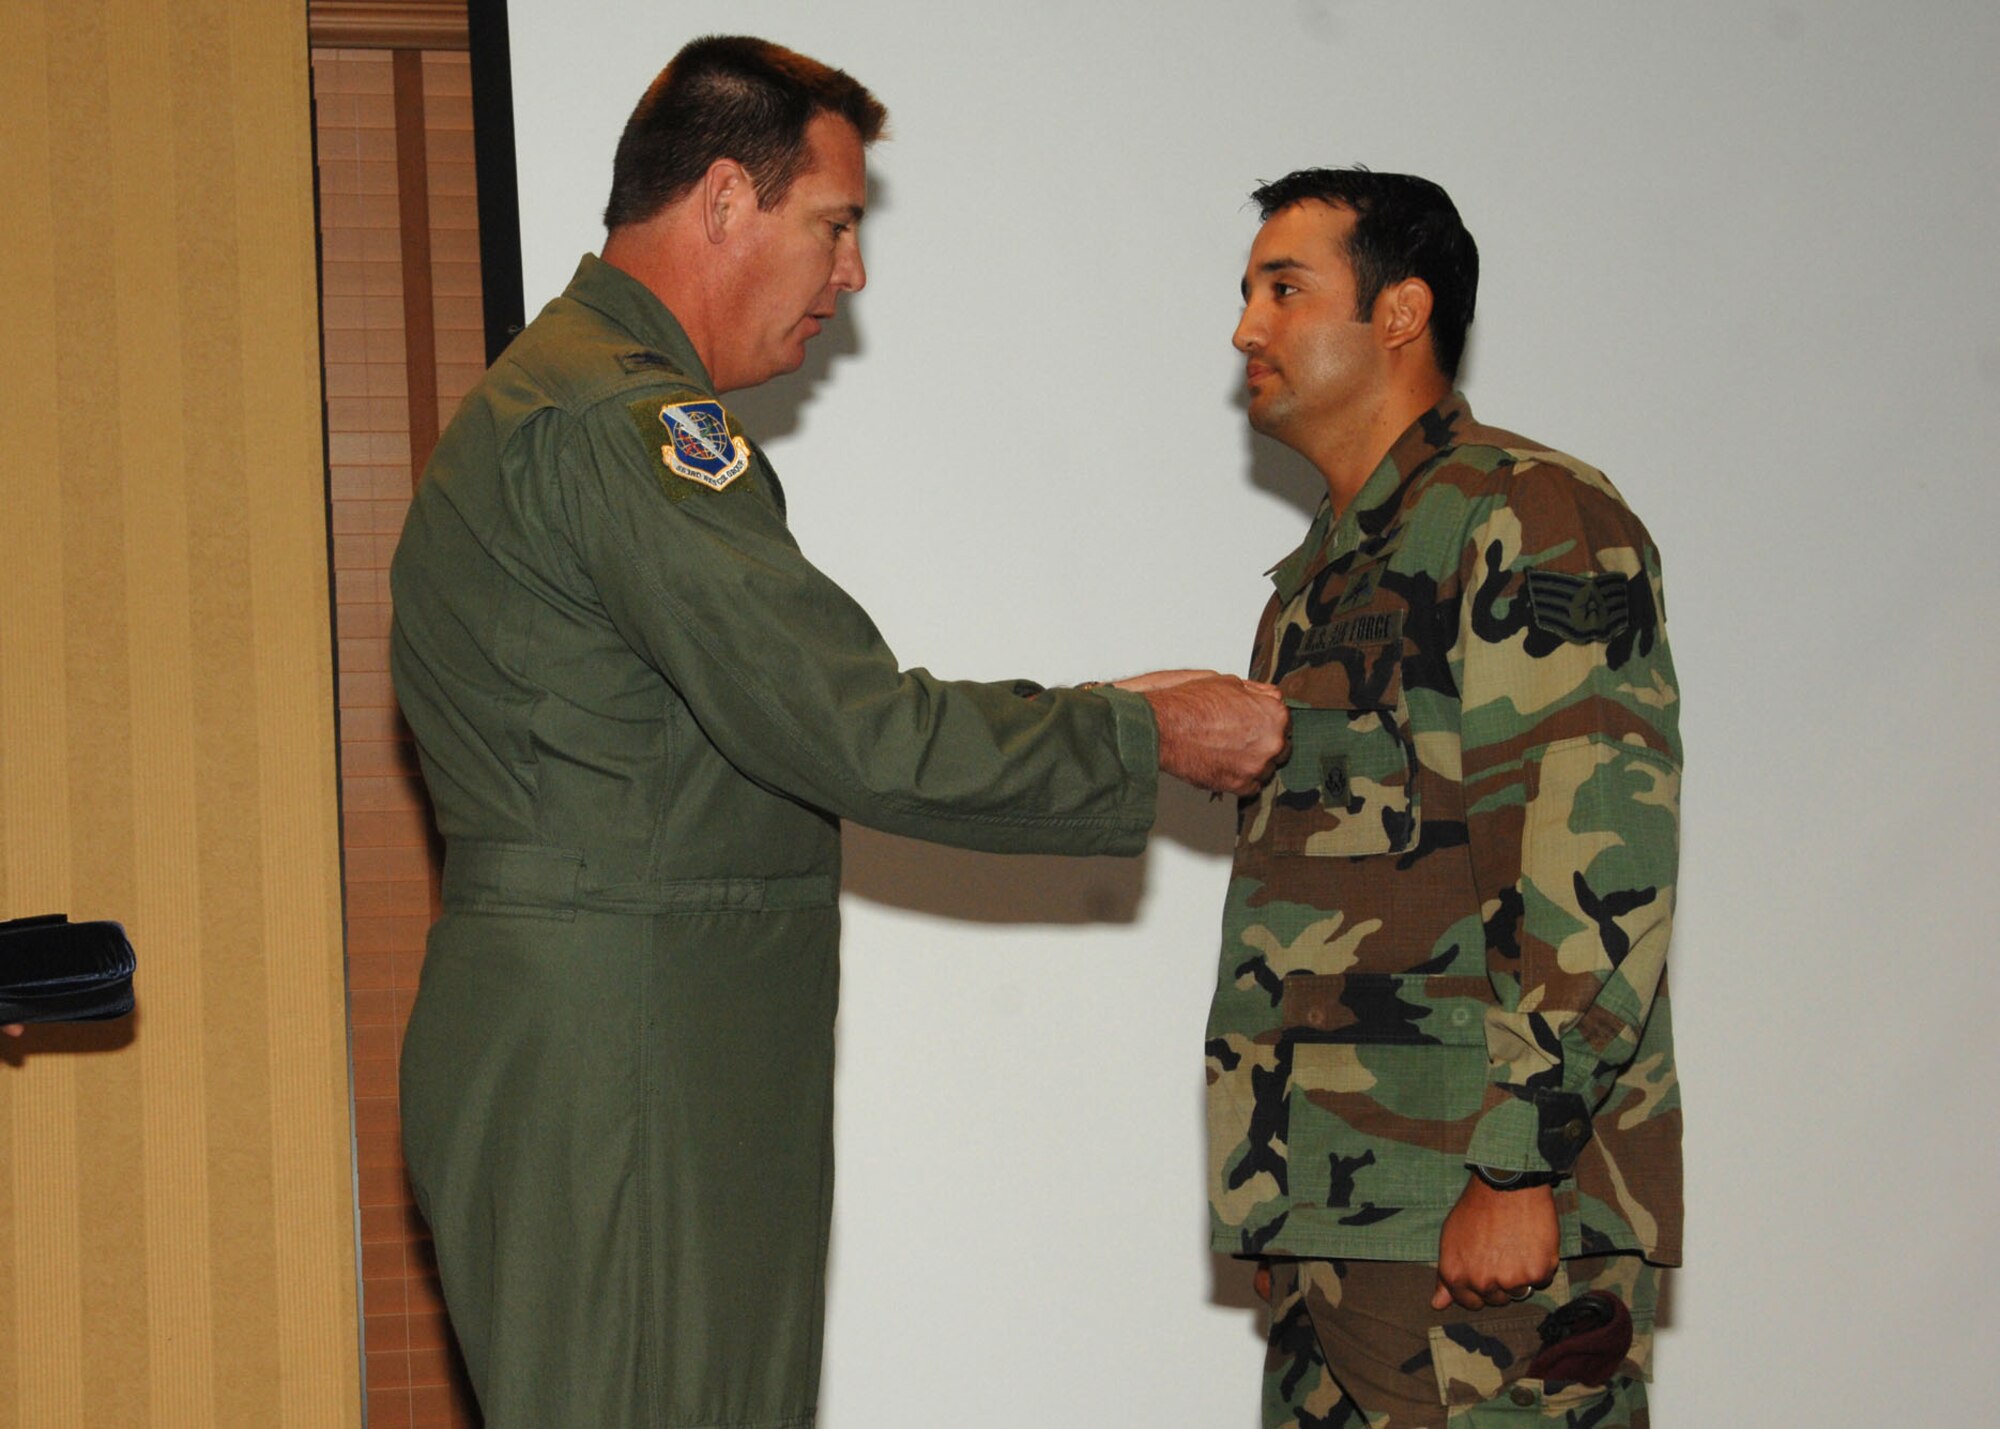 Col. Lee DePalo, 563rd Rescue Group commander, presents the Bronze Star Medal to Staff Sgt. Jose Cervantes during a commander’s call at the Officers’ Club here July 25.  Sergeant Cervantes was awarded the Bronze Star for his meritorious service as a pararescue team member while deployed to Afghanistan from May 5, 2006 to May 7, 2007.  During this period, while exposed to extreme danger from hostile machine gun fire and rocket attacks, Sergeant Cervantes courageously executed recovery operations for a crashed CH-47 helicopter.  (U.S. Air Force photo by Senior Airman Alesia Goosic)